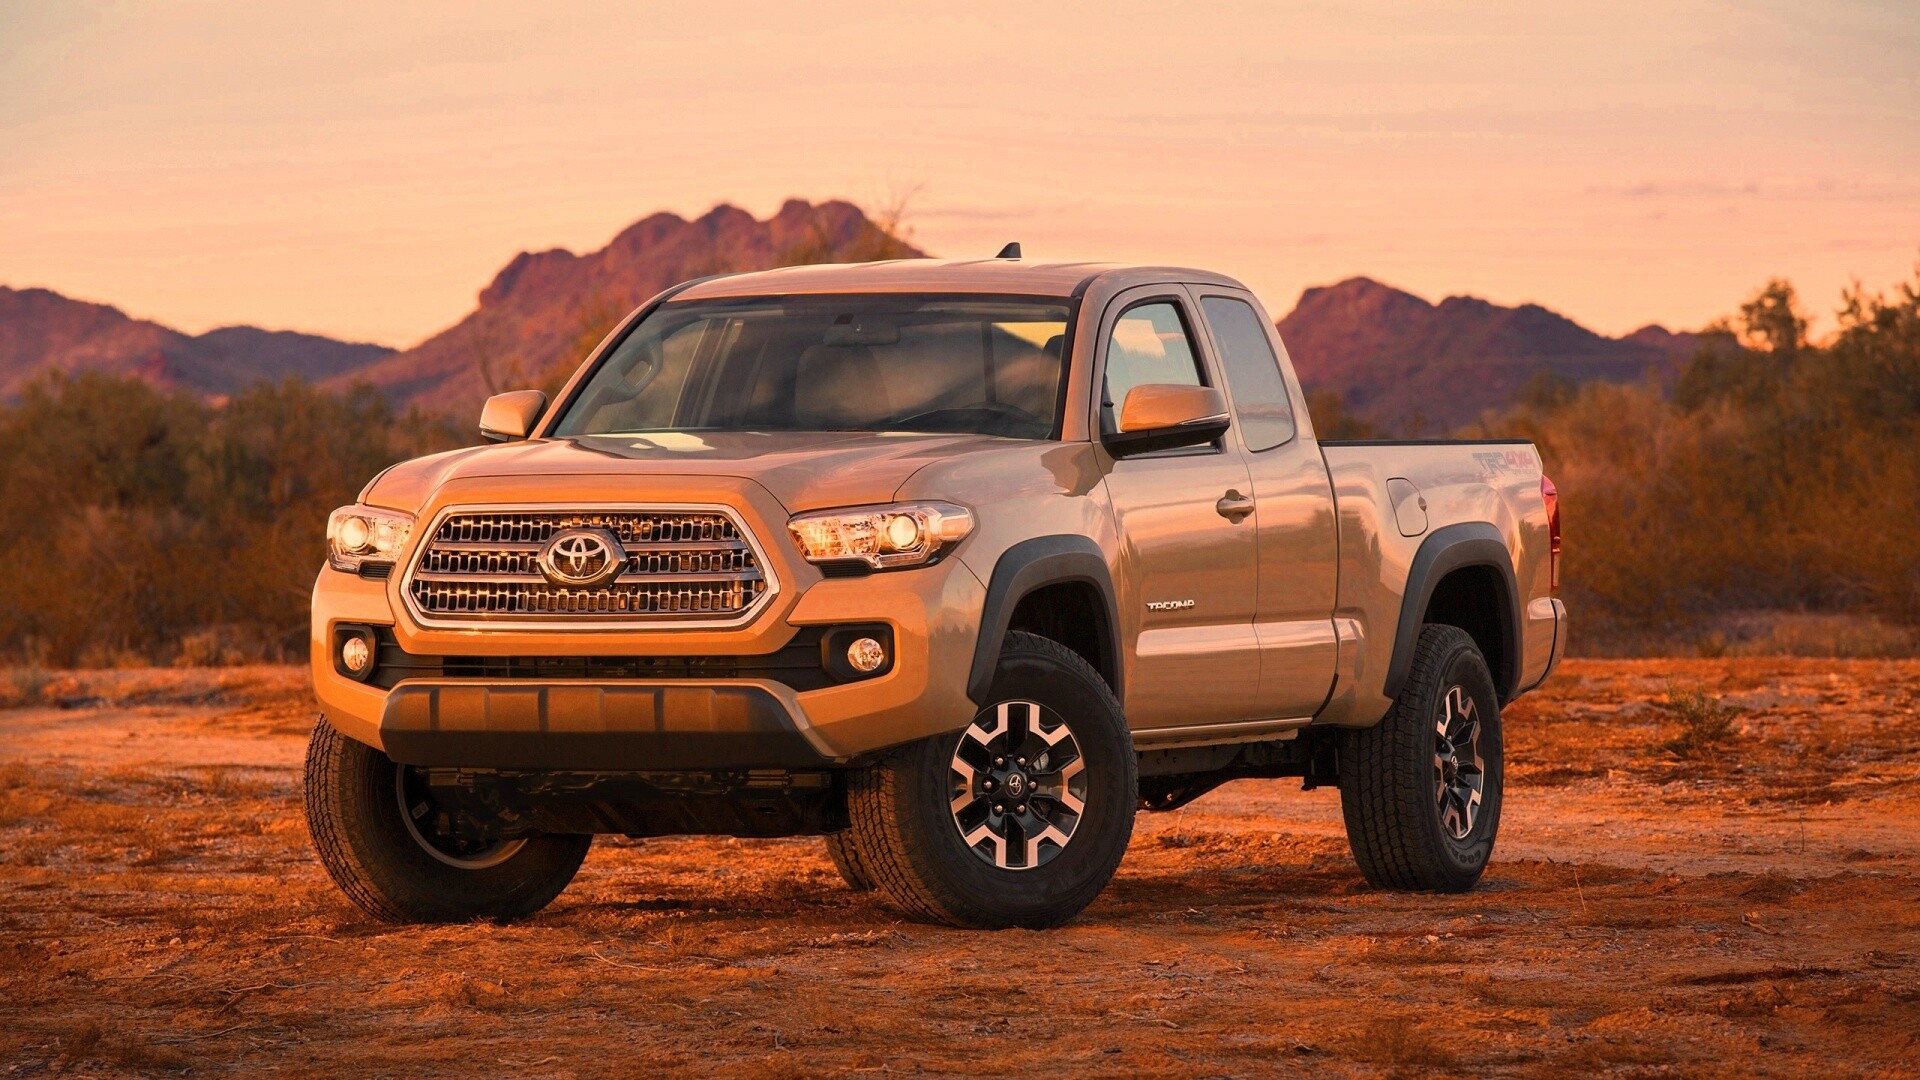 Toyota Tacoma: The third generation was officially unveiled at the January 2015 North American International Auto Show. 1920x1080 Full HD Background.